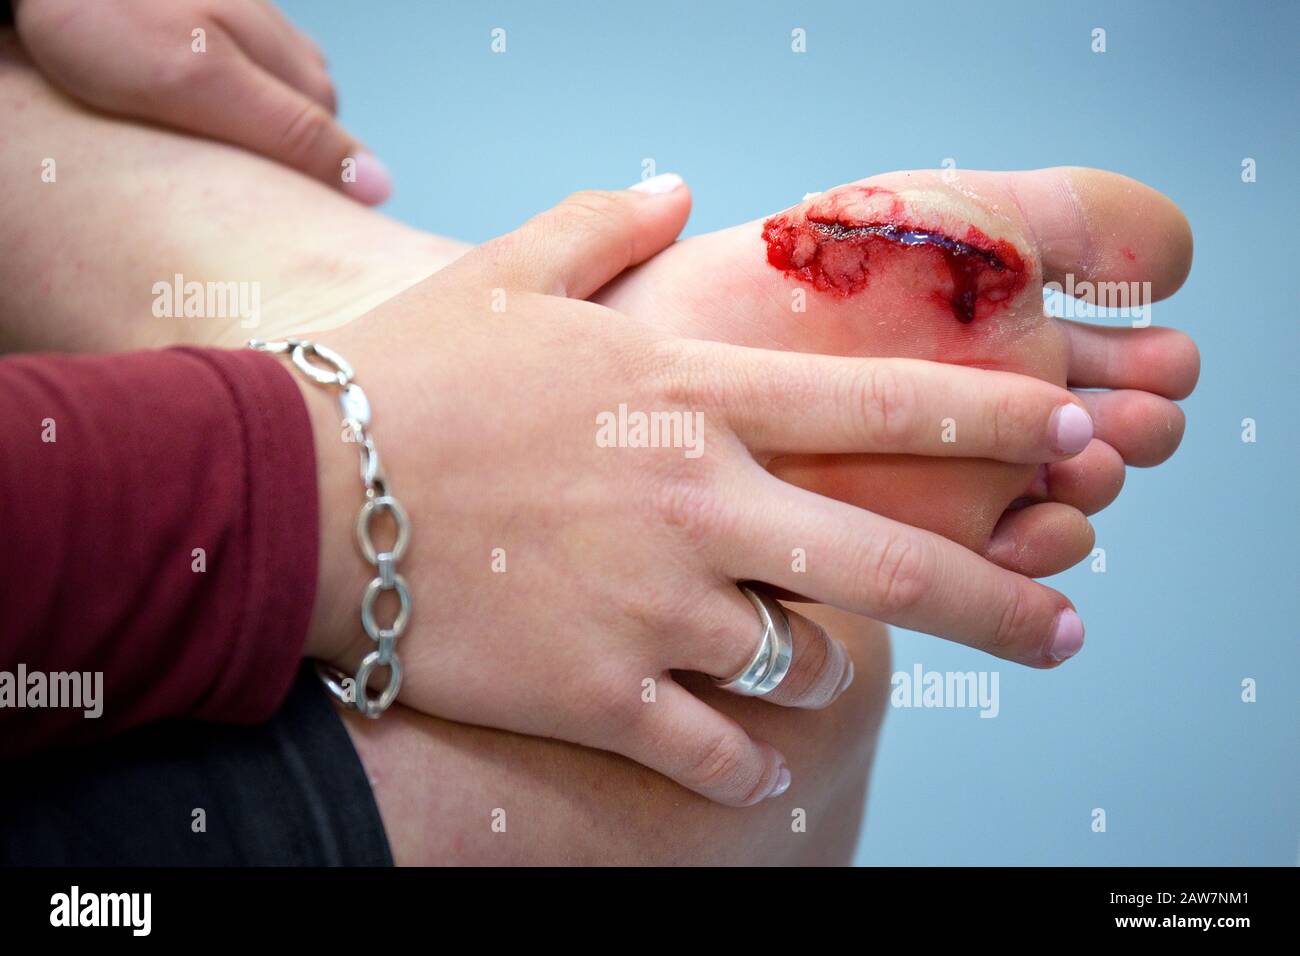 Large cut on the left foot through glass gives an ugly wound with a lot of blood Stock Photo